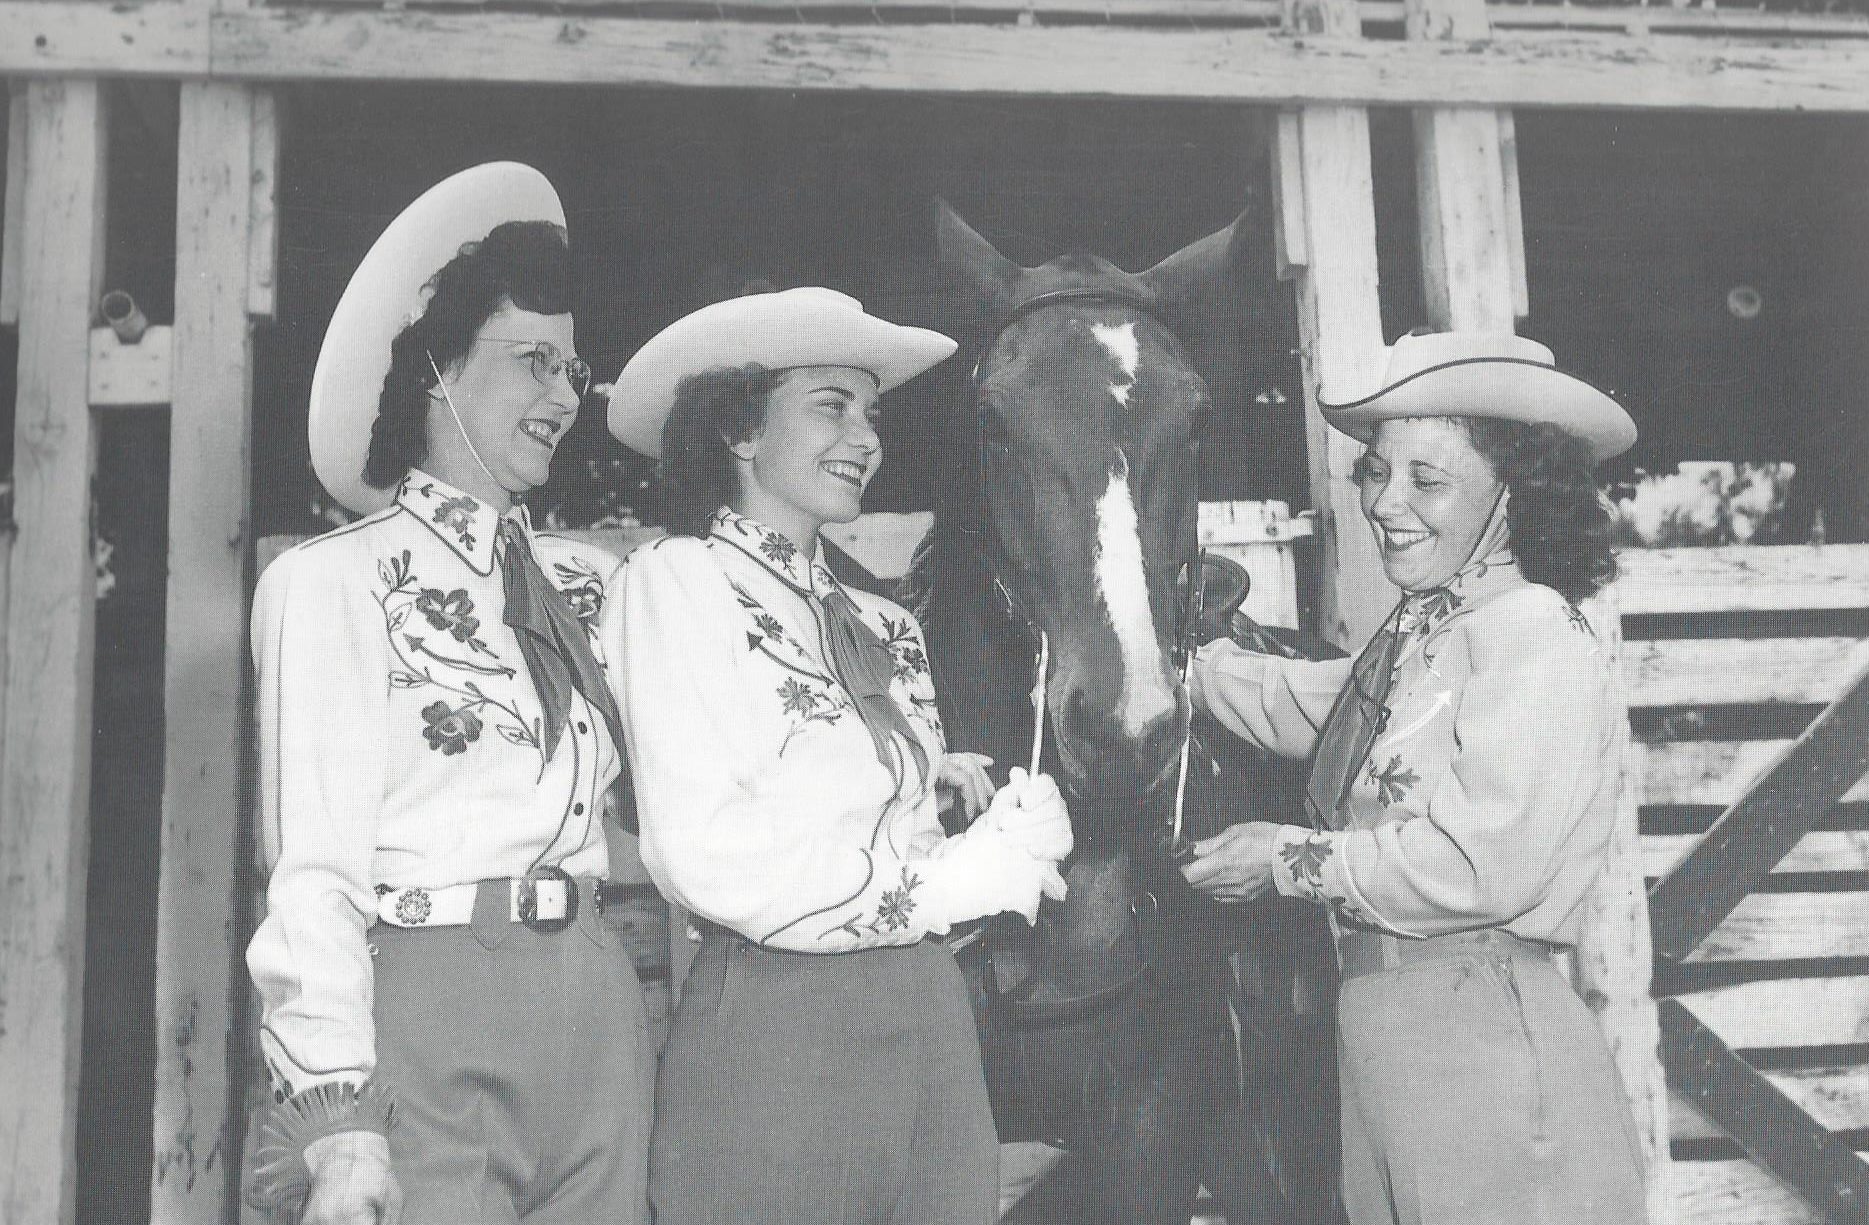 The 1949 Lehi Round-Up Royalty included, from left to right: Orlyn Davis, Queen Carol Crump, Eva Oxborrow (USHS).